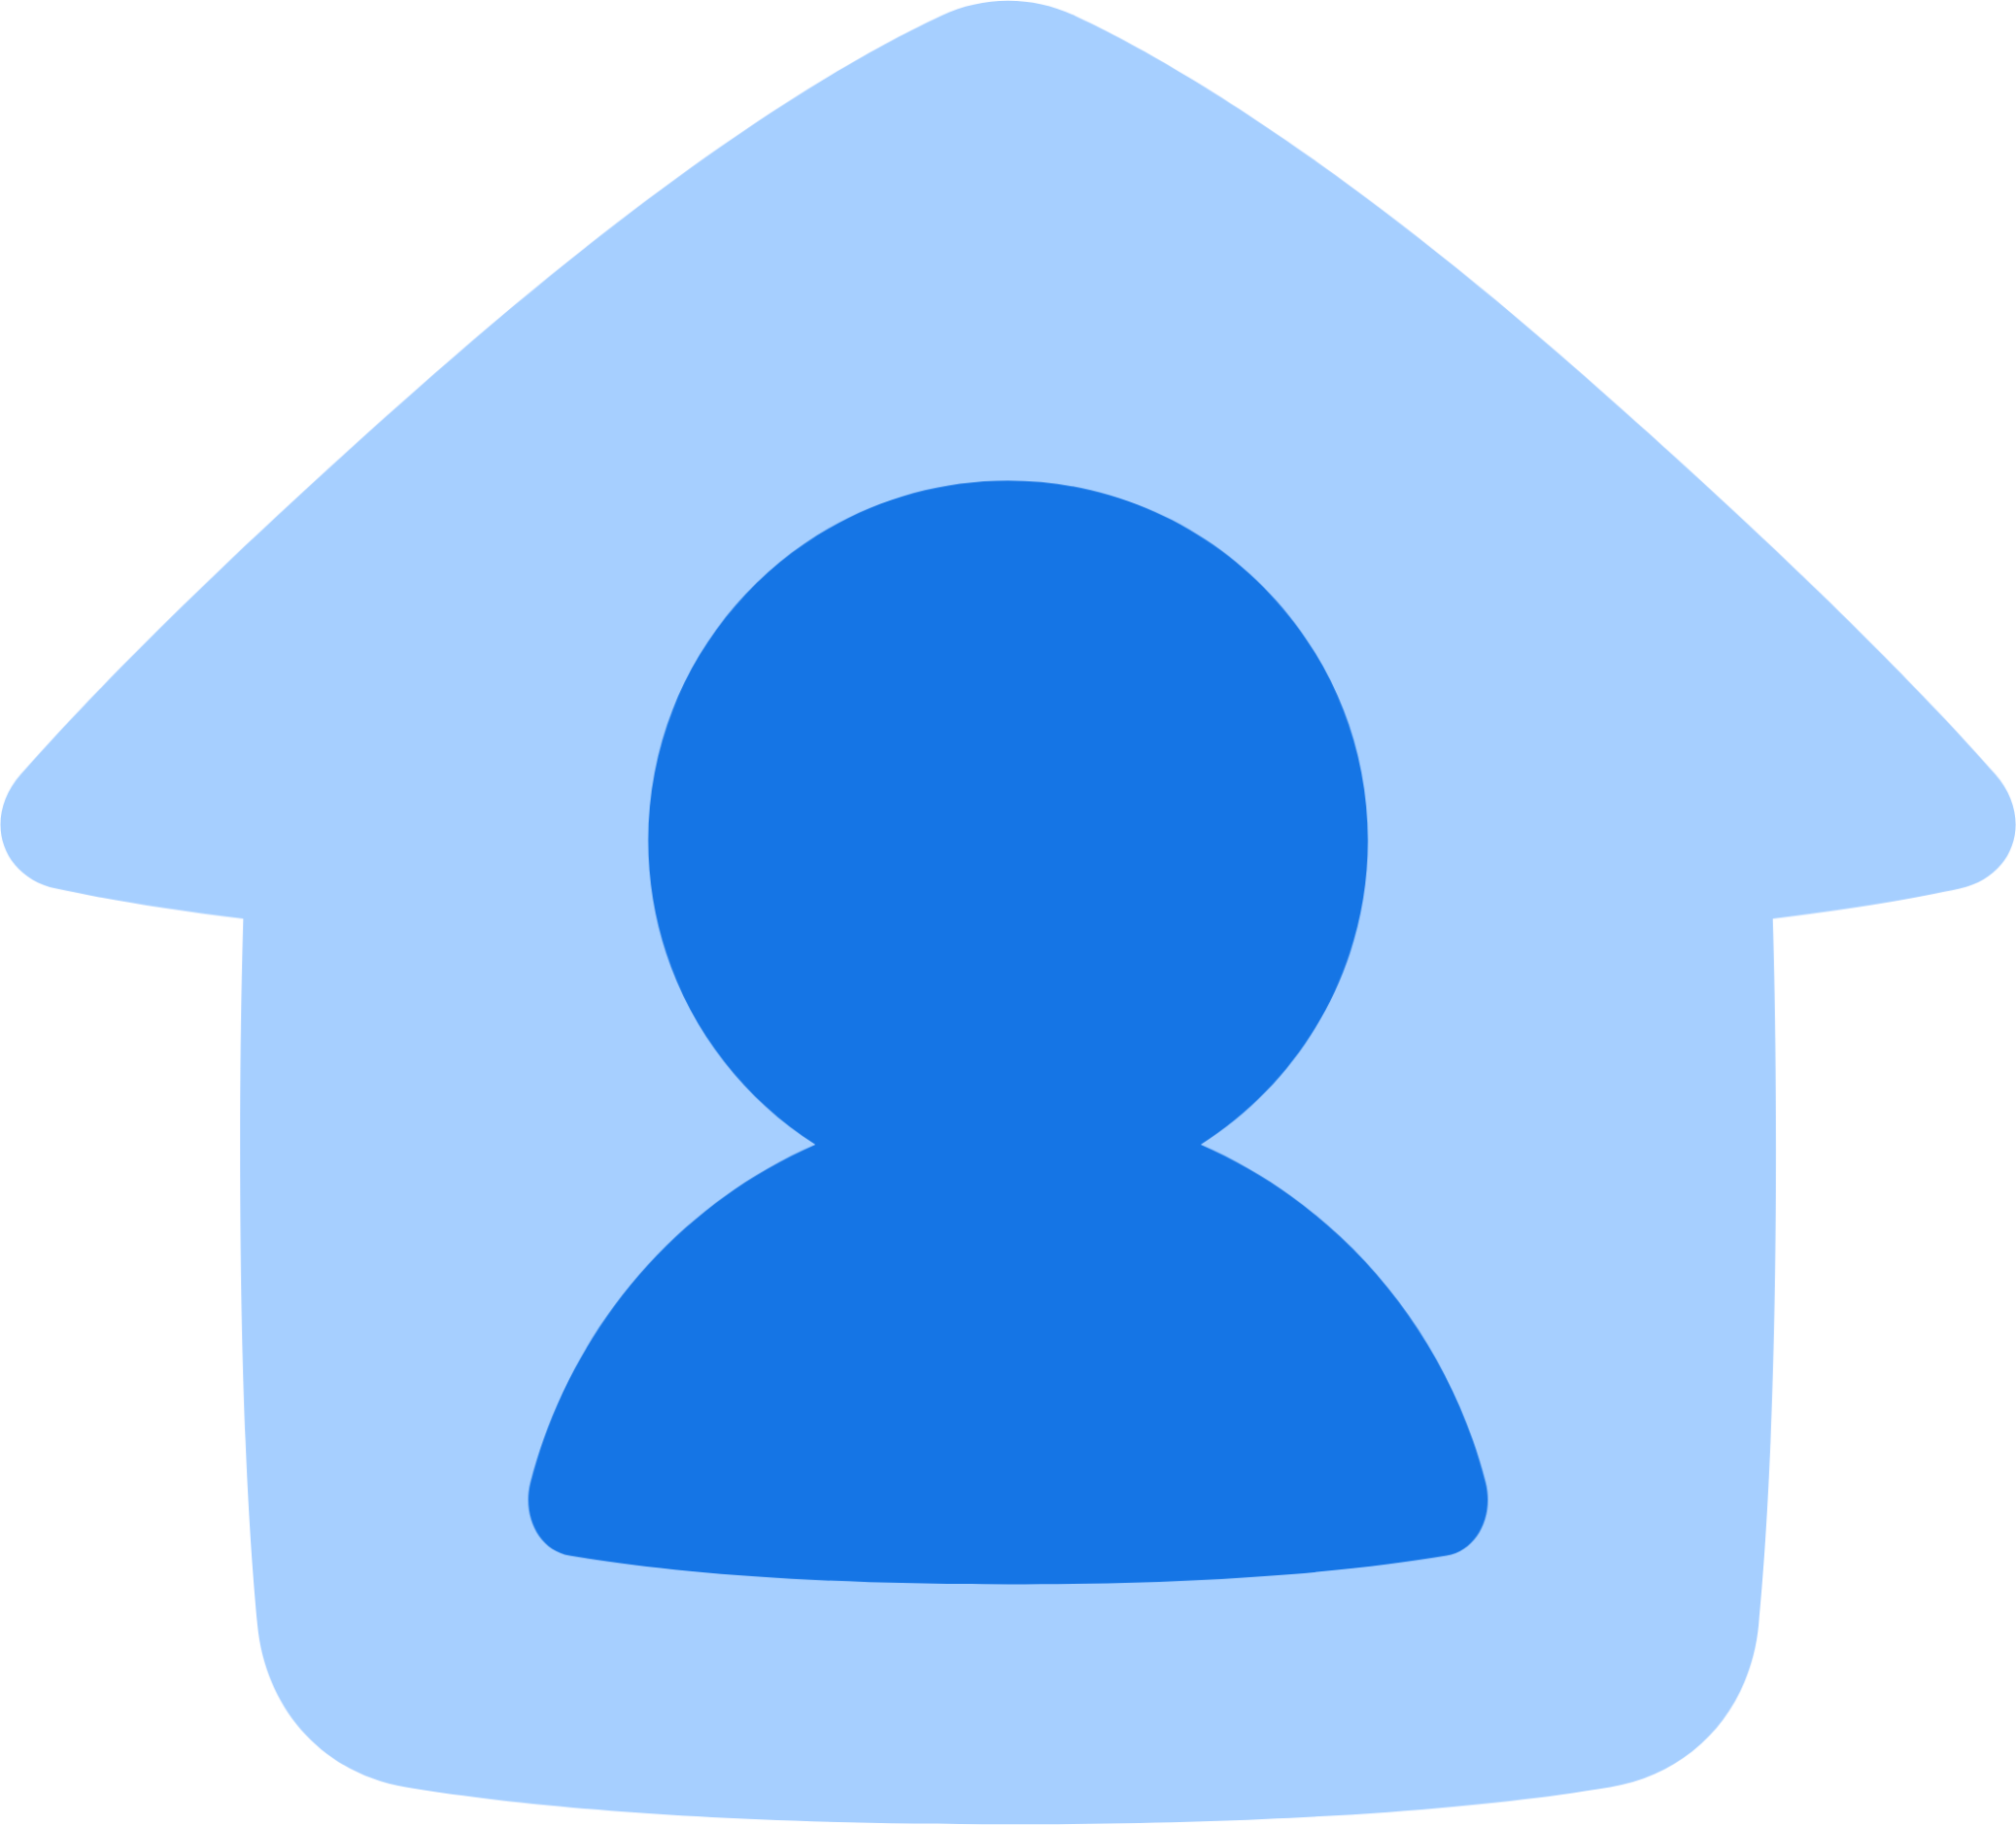 user home 2 icon